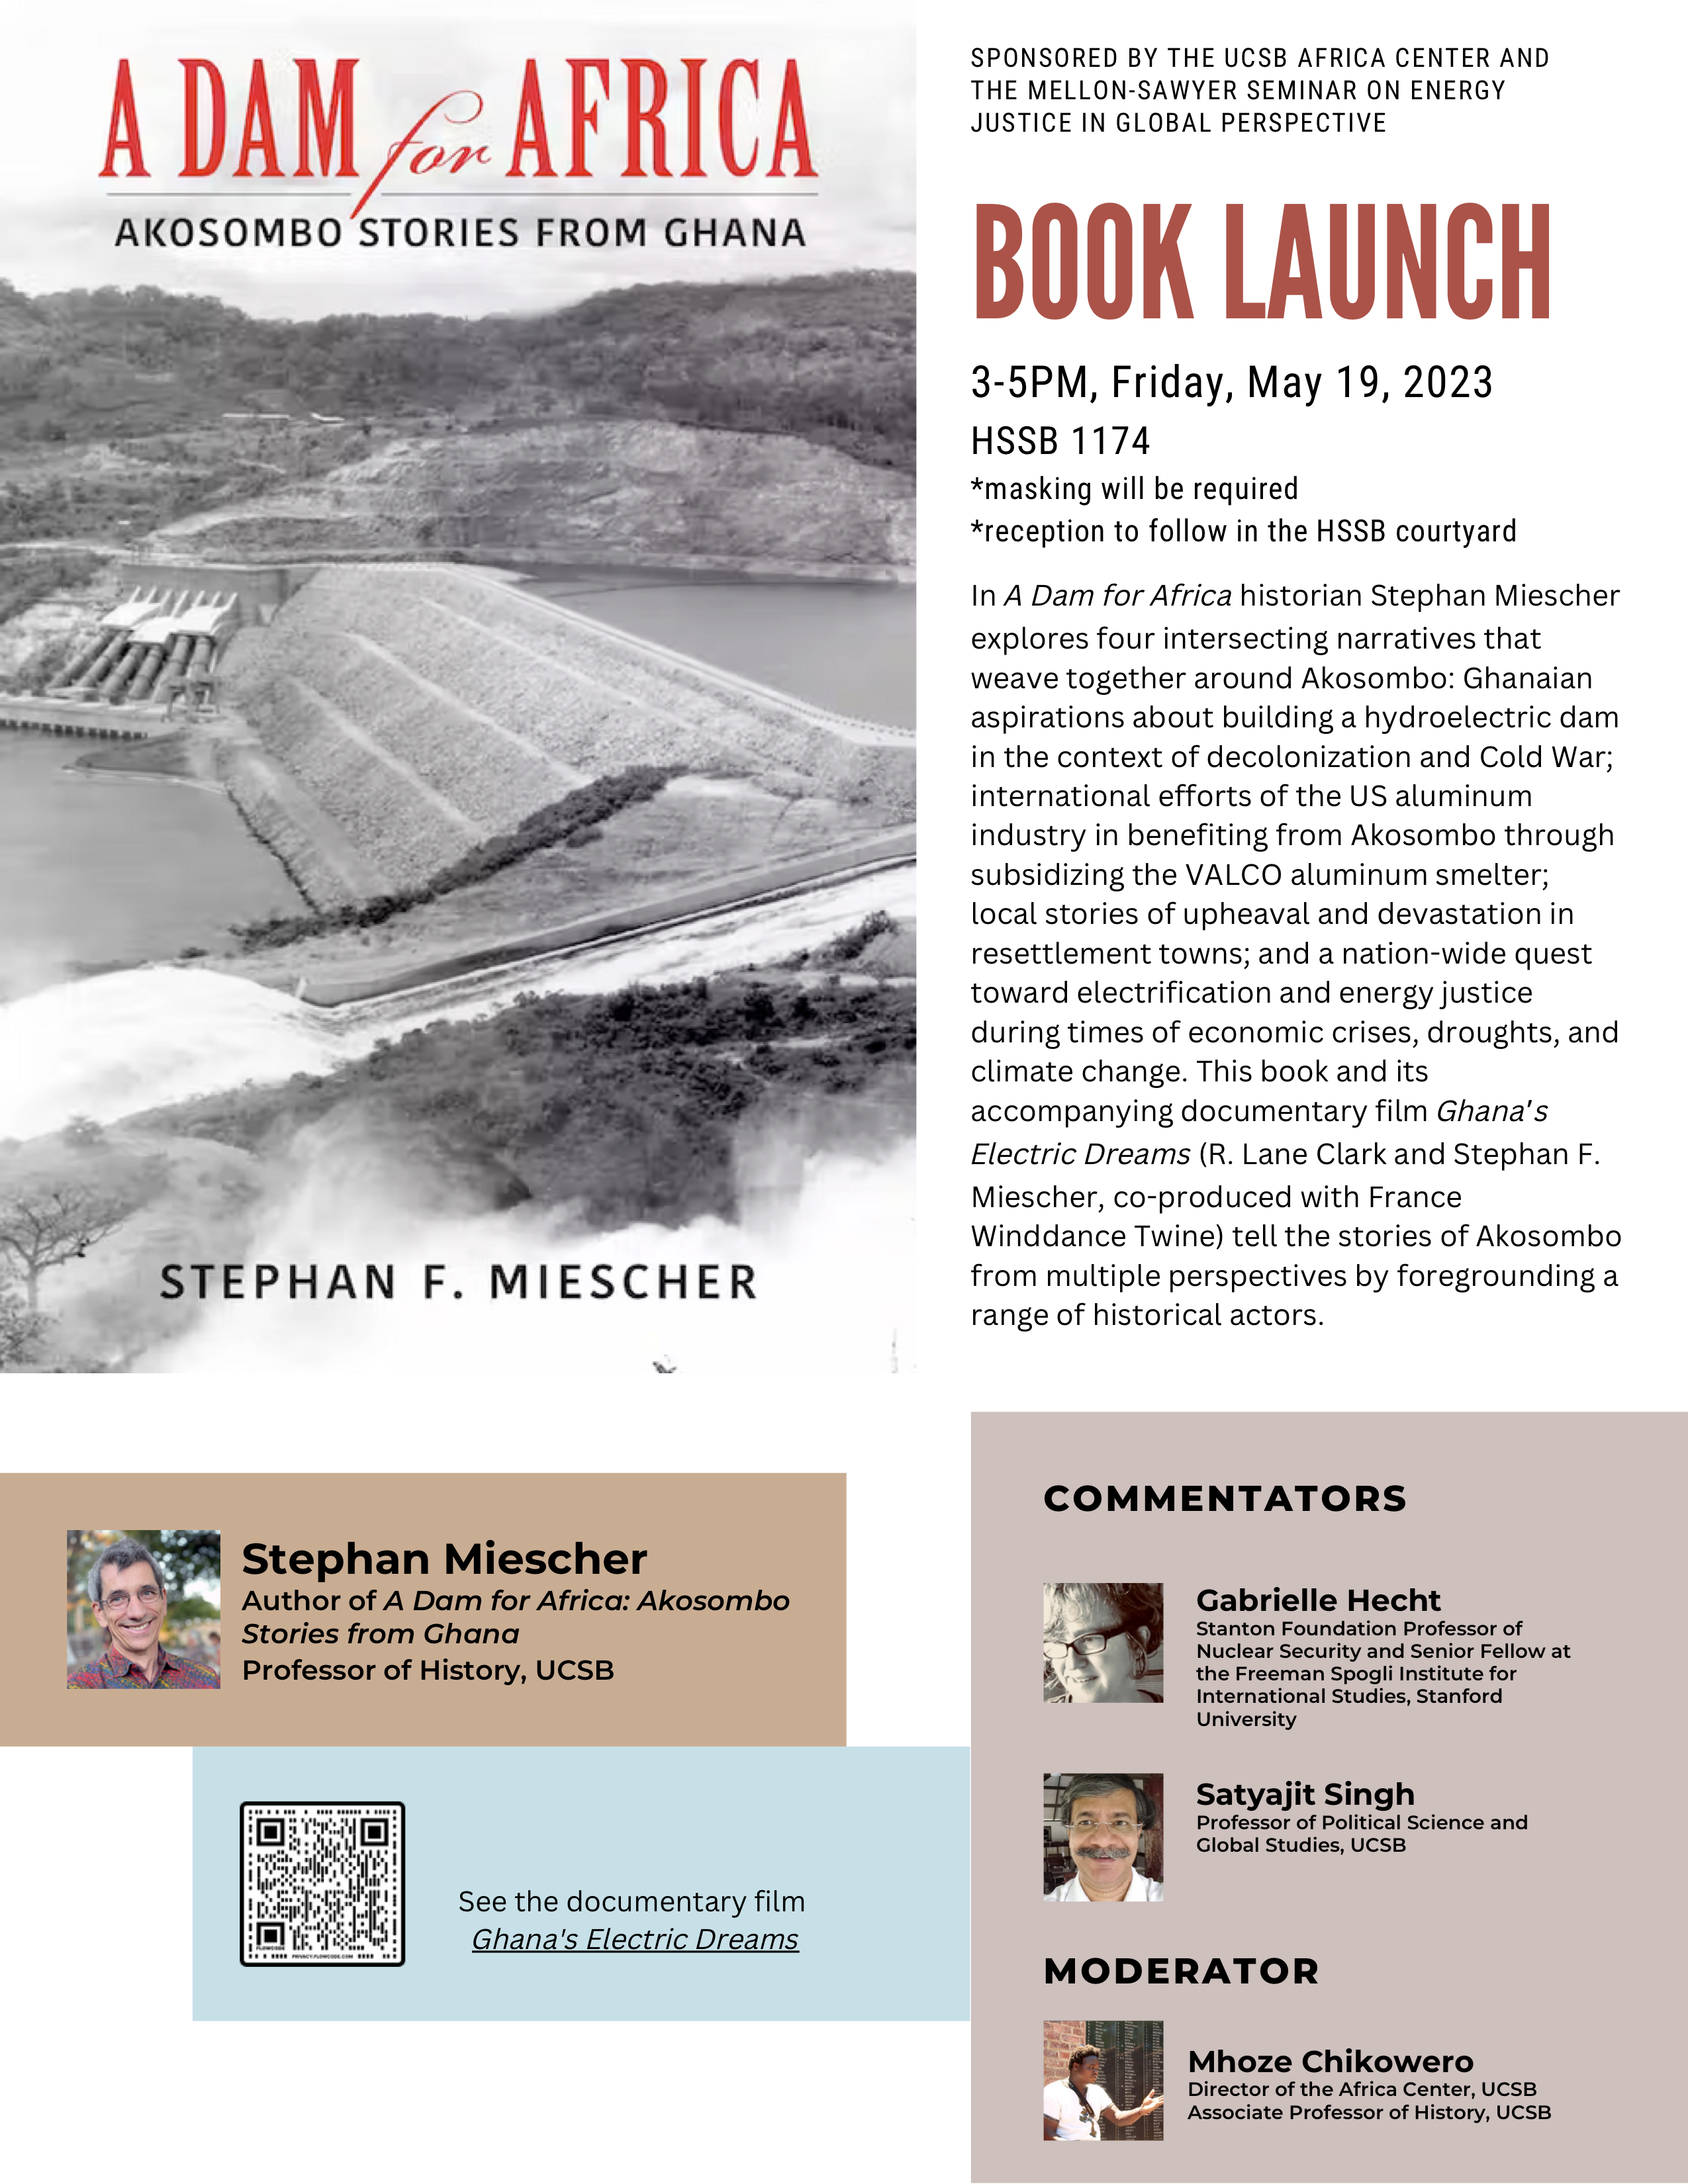 Flyer for A Dam for Africa, Akosombo Stories from Ghana Book Launch on May 19 from 3-5PM in HSSB 1174